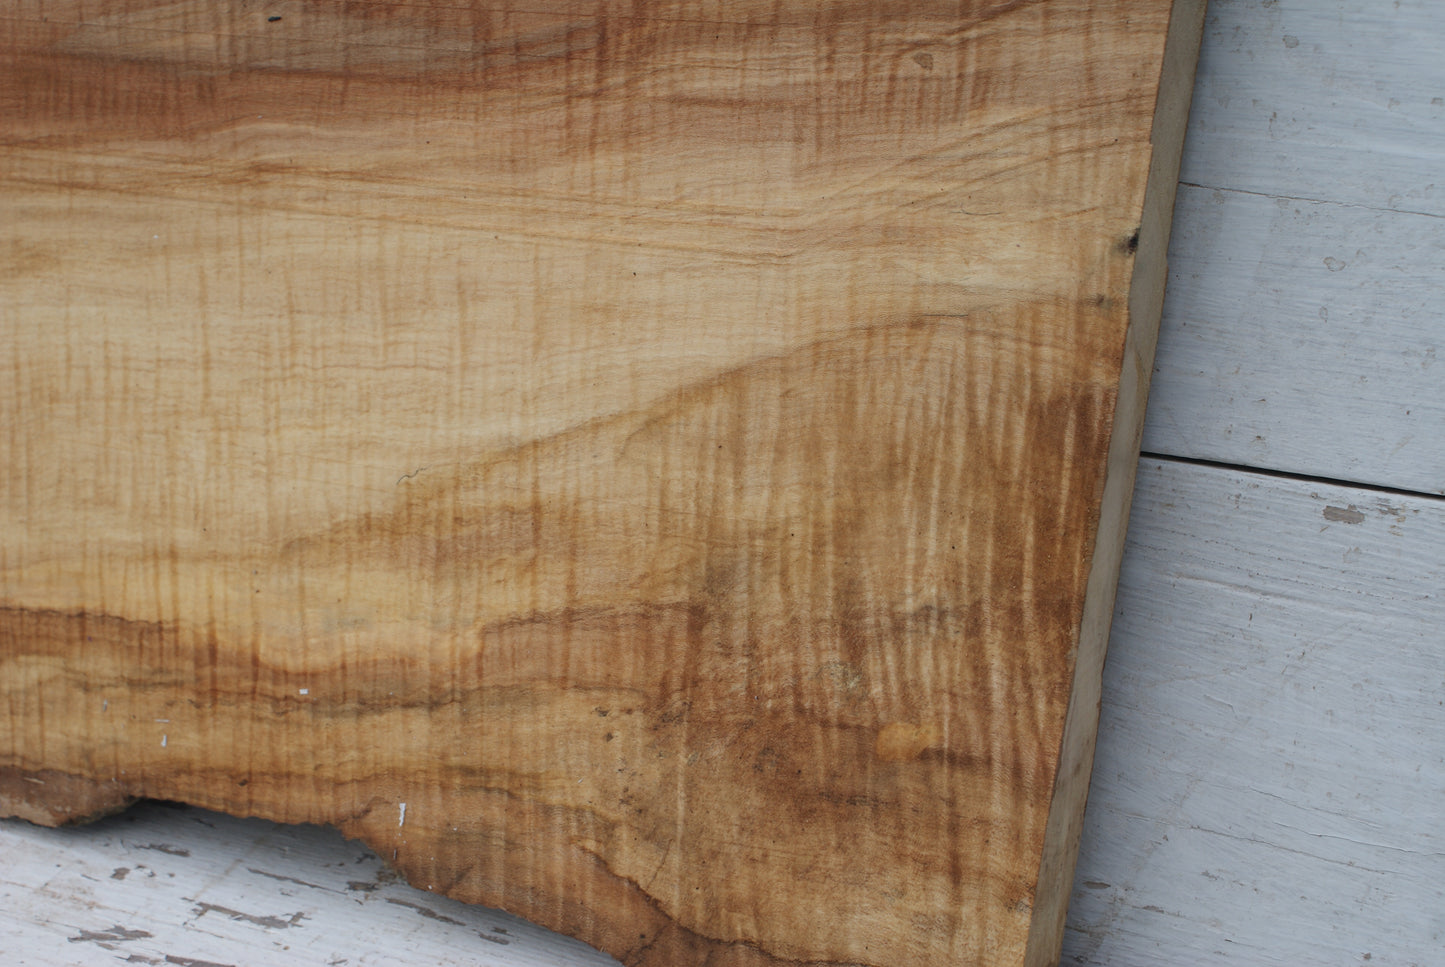 Spalted Rippled Sycamore 1278 L x 465 - 357  W x 46 D (mm) (458)